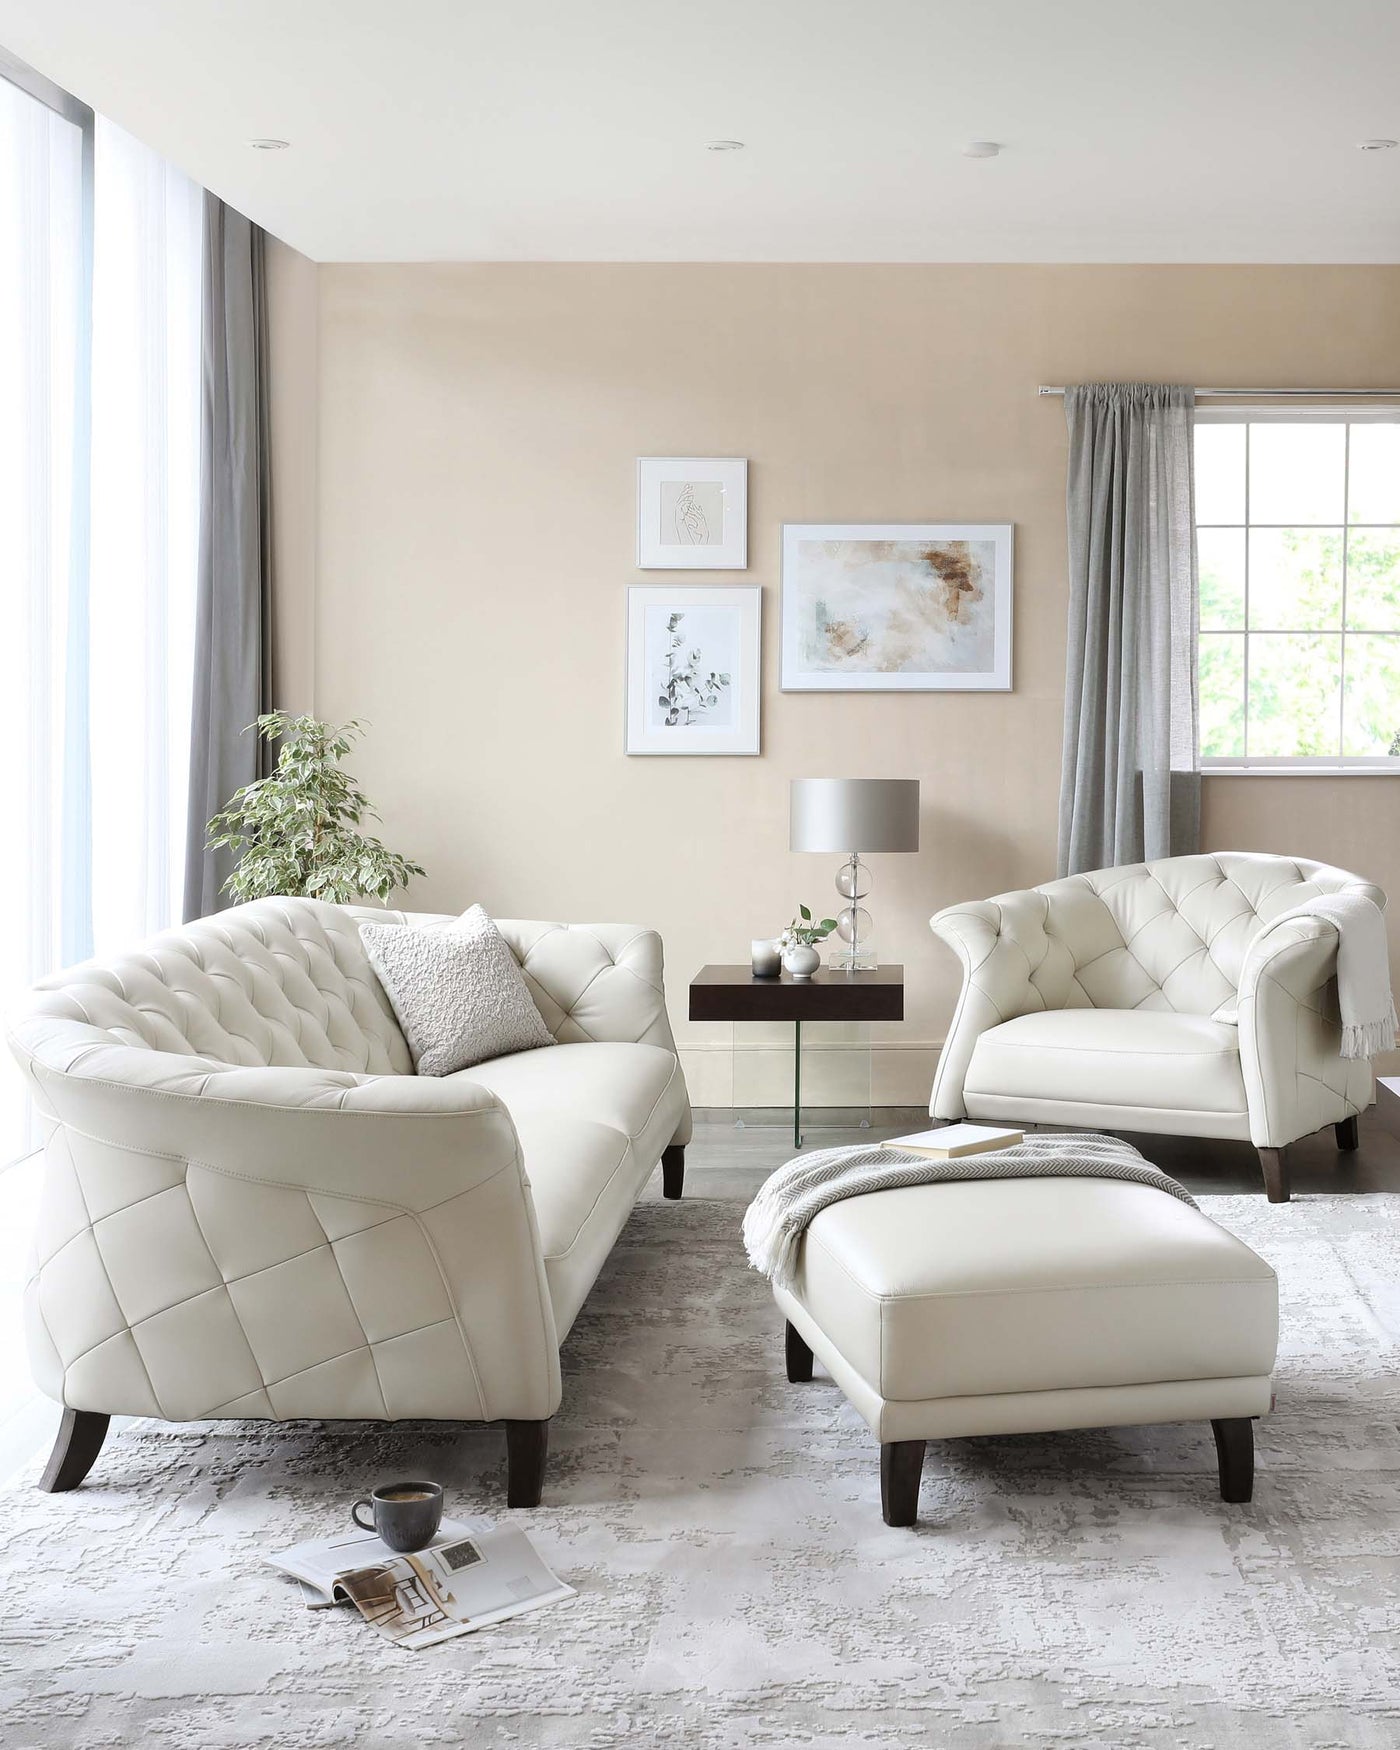 Elegant living room set featuring a button-tufted cream-colored leather sofa with a matching loveseat and an armchair, complemented by a square ottoman. The furniture pieces have thick padded cushions and are accented with geometric stitching. Each item stands on dark wooden legs, and the ensemble is placed on a textured grey and white area rug.